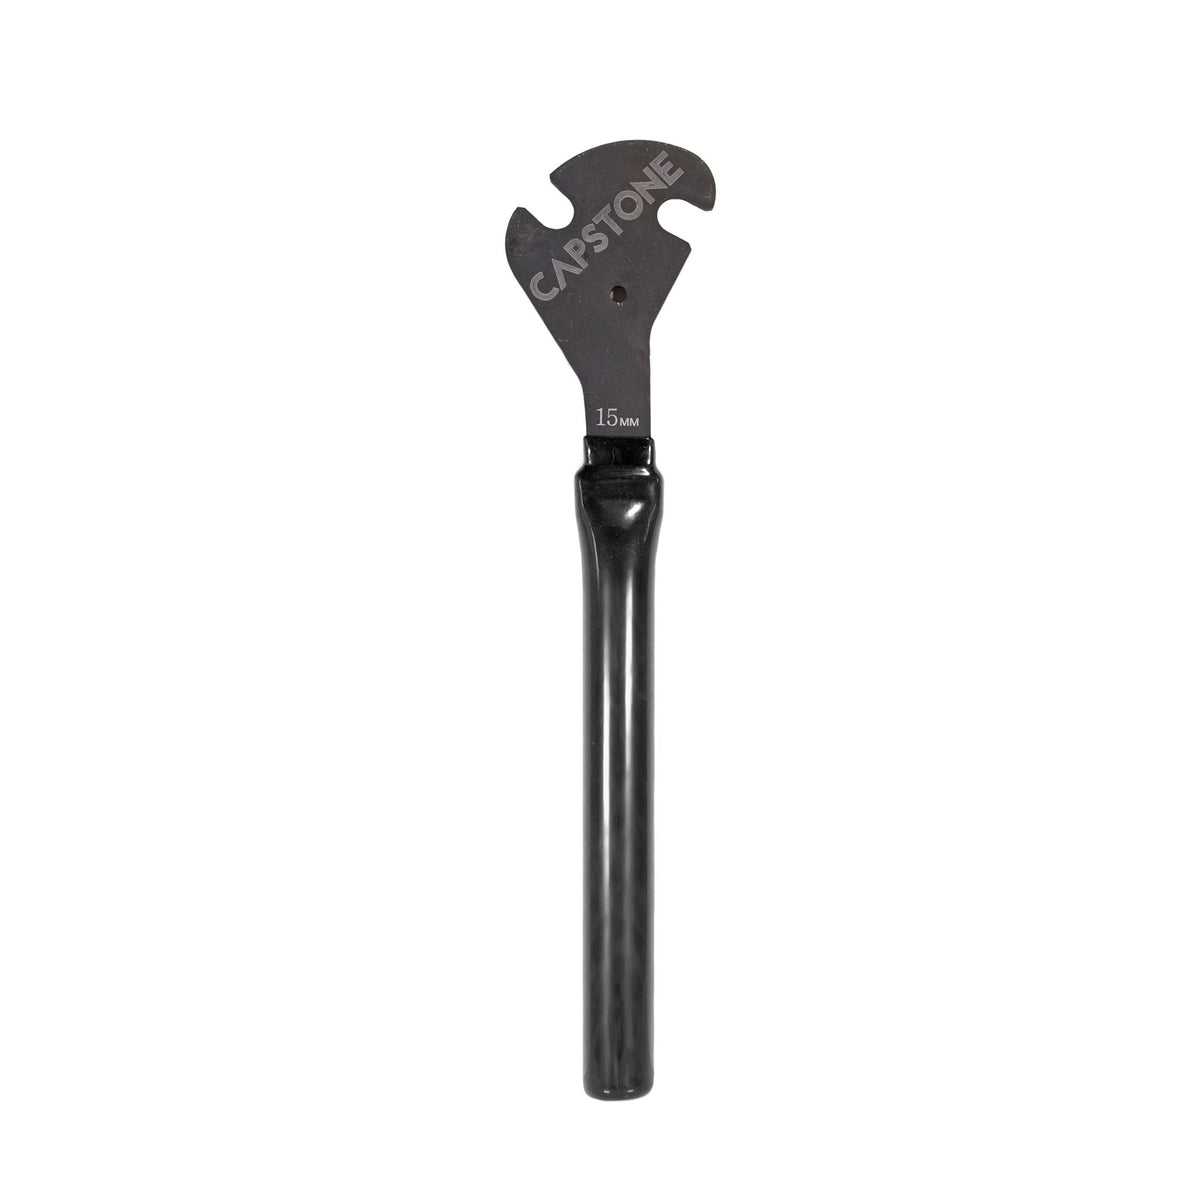 Capstone 15mm Heavy Duty Pedal Wrench | Fits Most Pedals